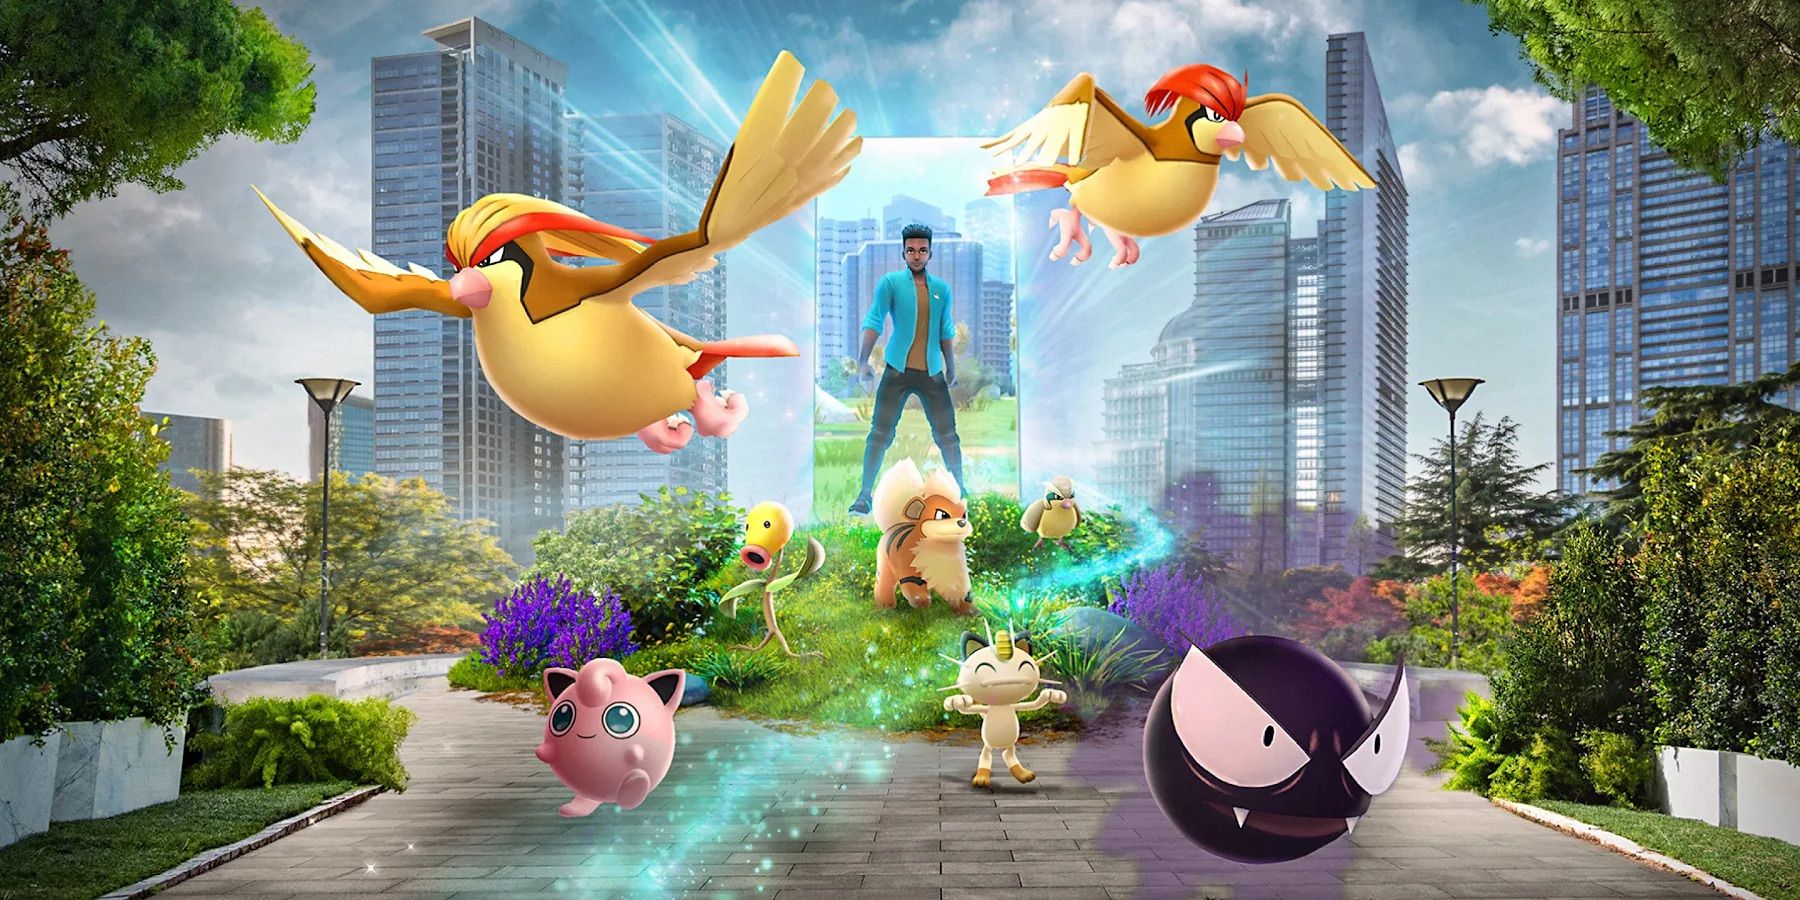 A Pokémon GO avatar standing in a sort of portal doorway surrounded by a variety of Gen 1 Pokémon.